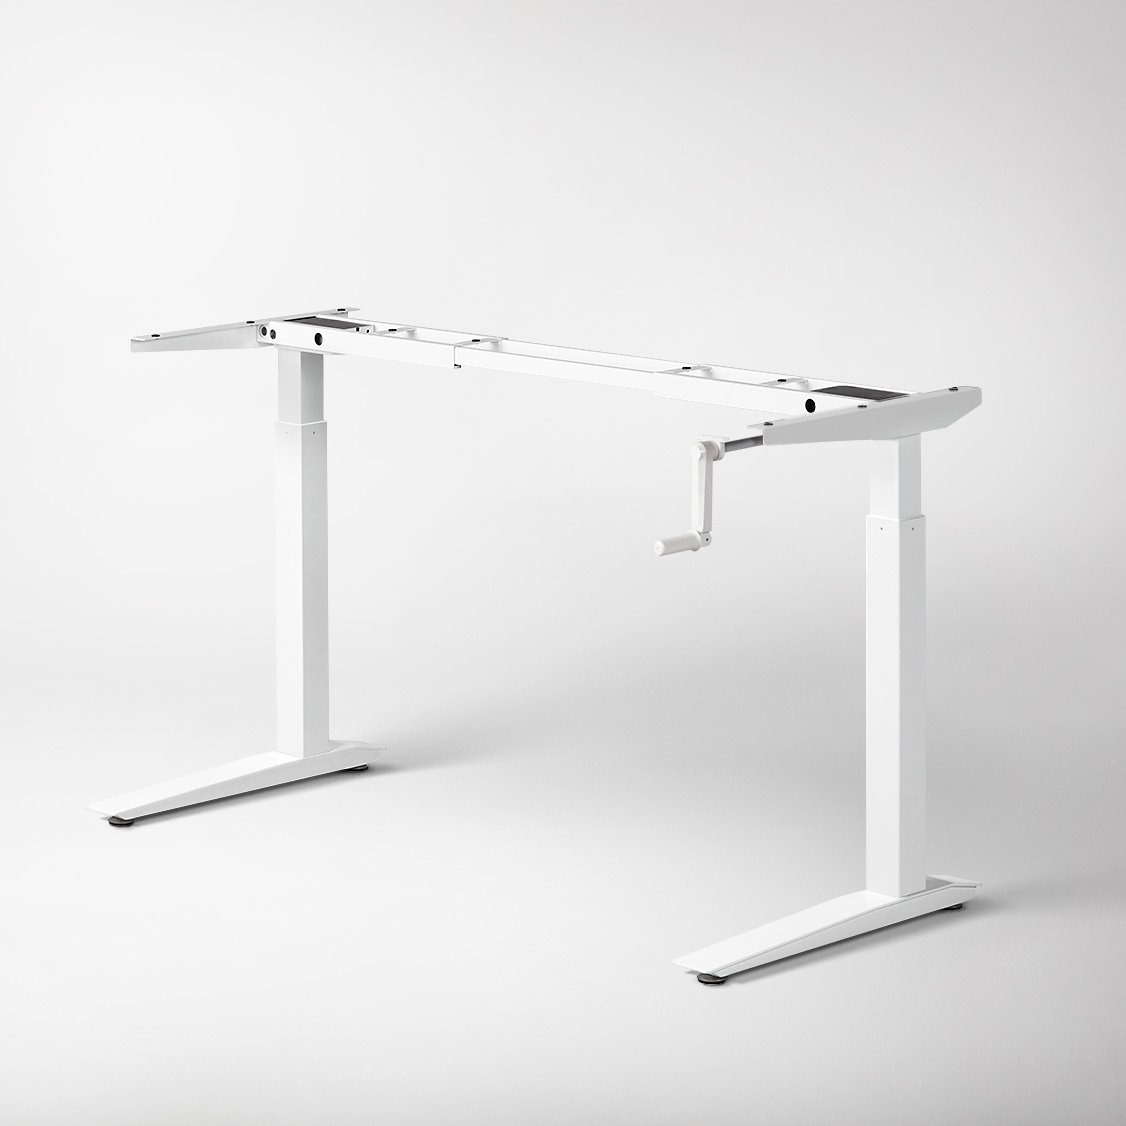 Fully Jarvis Crank-Powered Standing Desk Frame Only - Supports Tops from 48" to 70" Wide and 30" deep (Not Included) - Adjustable Heigh...